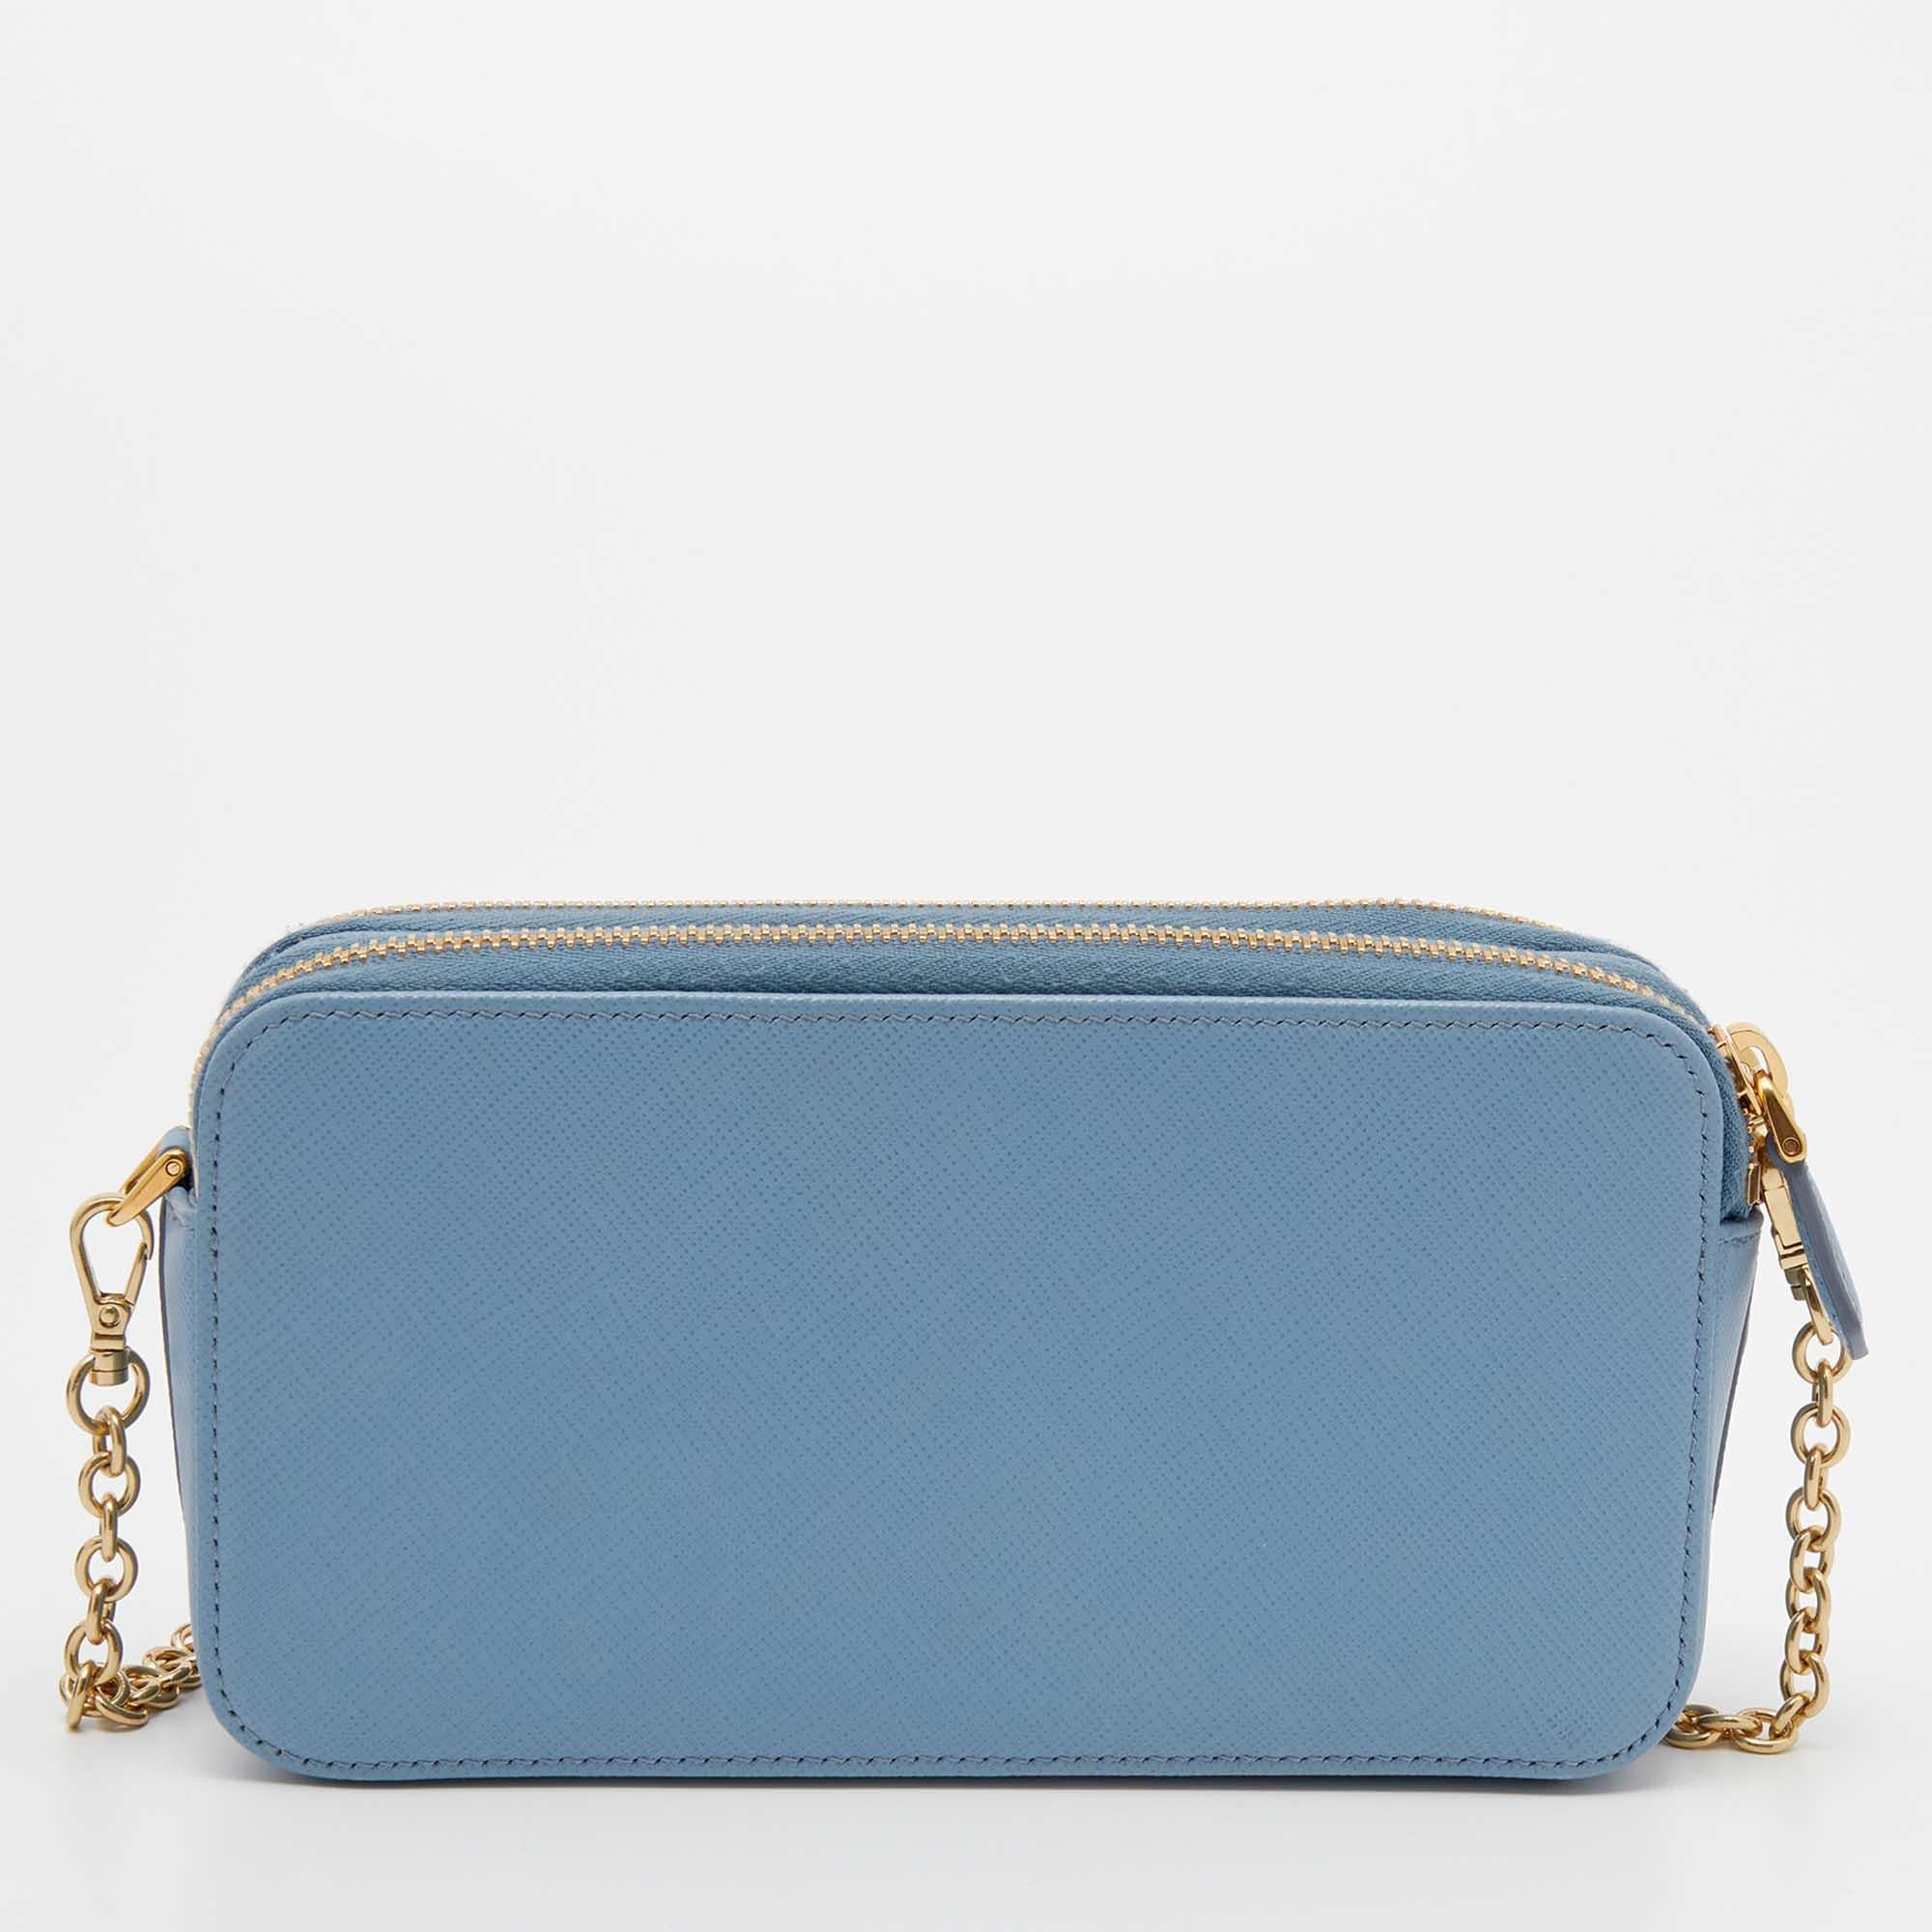 Carry this versatile Prada crossbody bag with you wherever you go! Made using light blue Saffiano leather, it has a compact shape and comes with a long chain strap. Style the lovely bag with any summer outfit!

Includes: Original Box